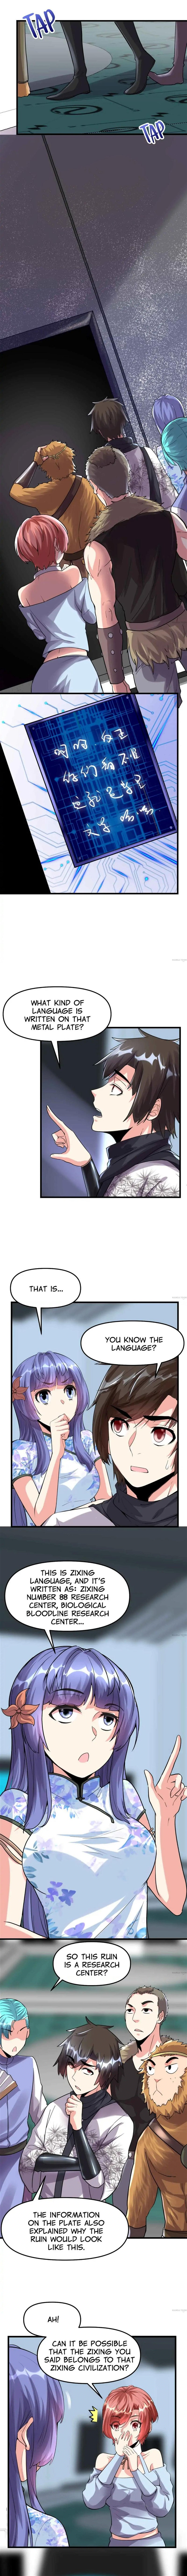 Cultivation, Kidding Me?! - Page 1